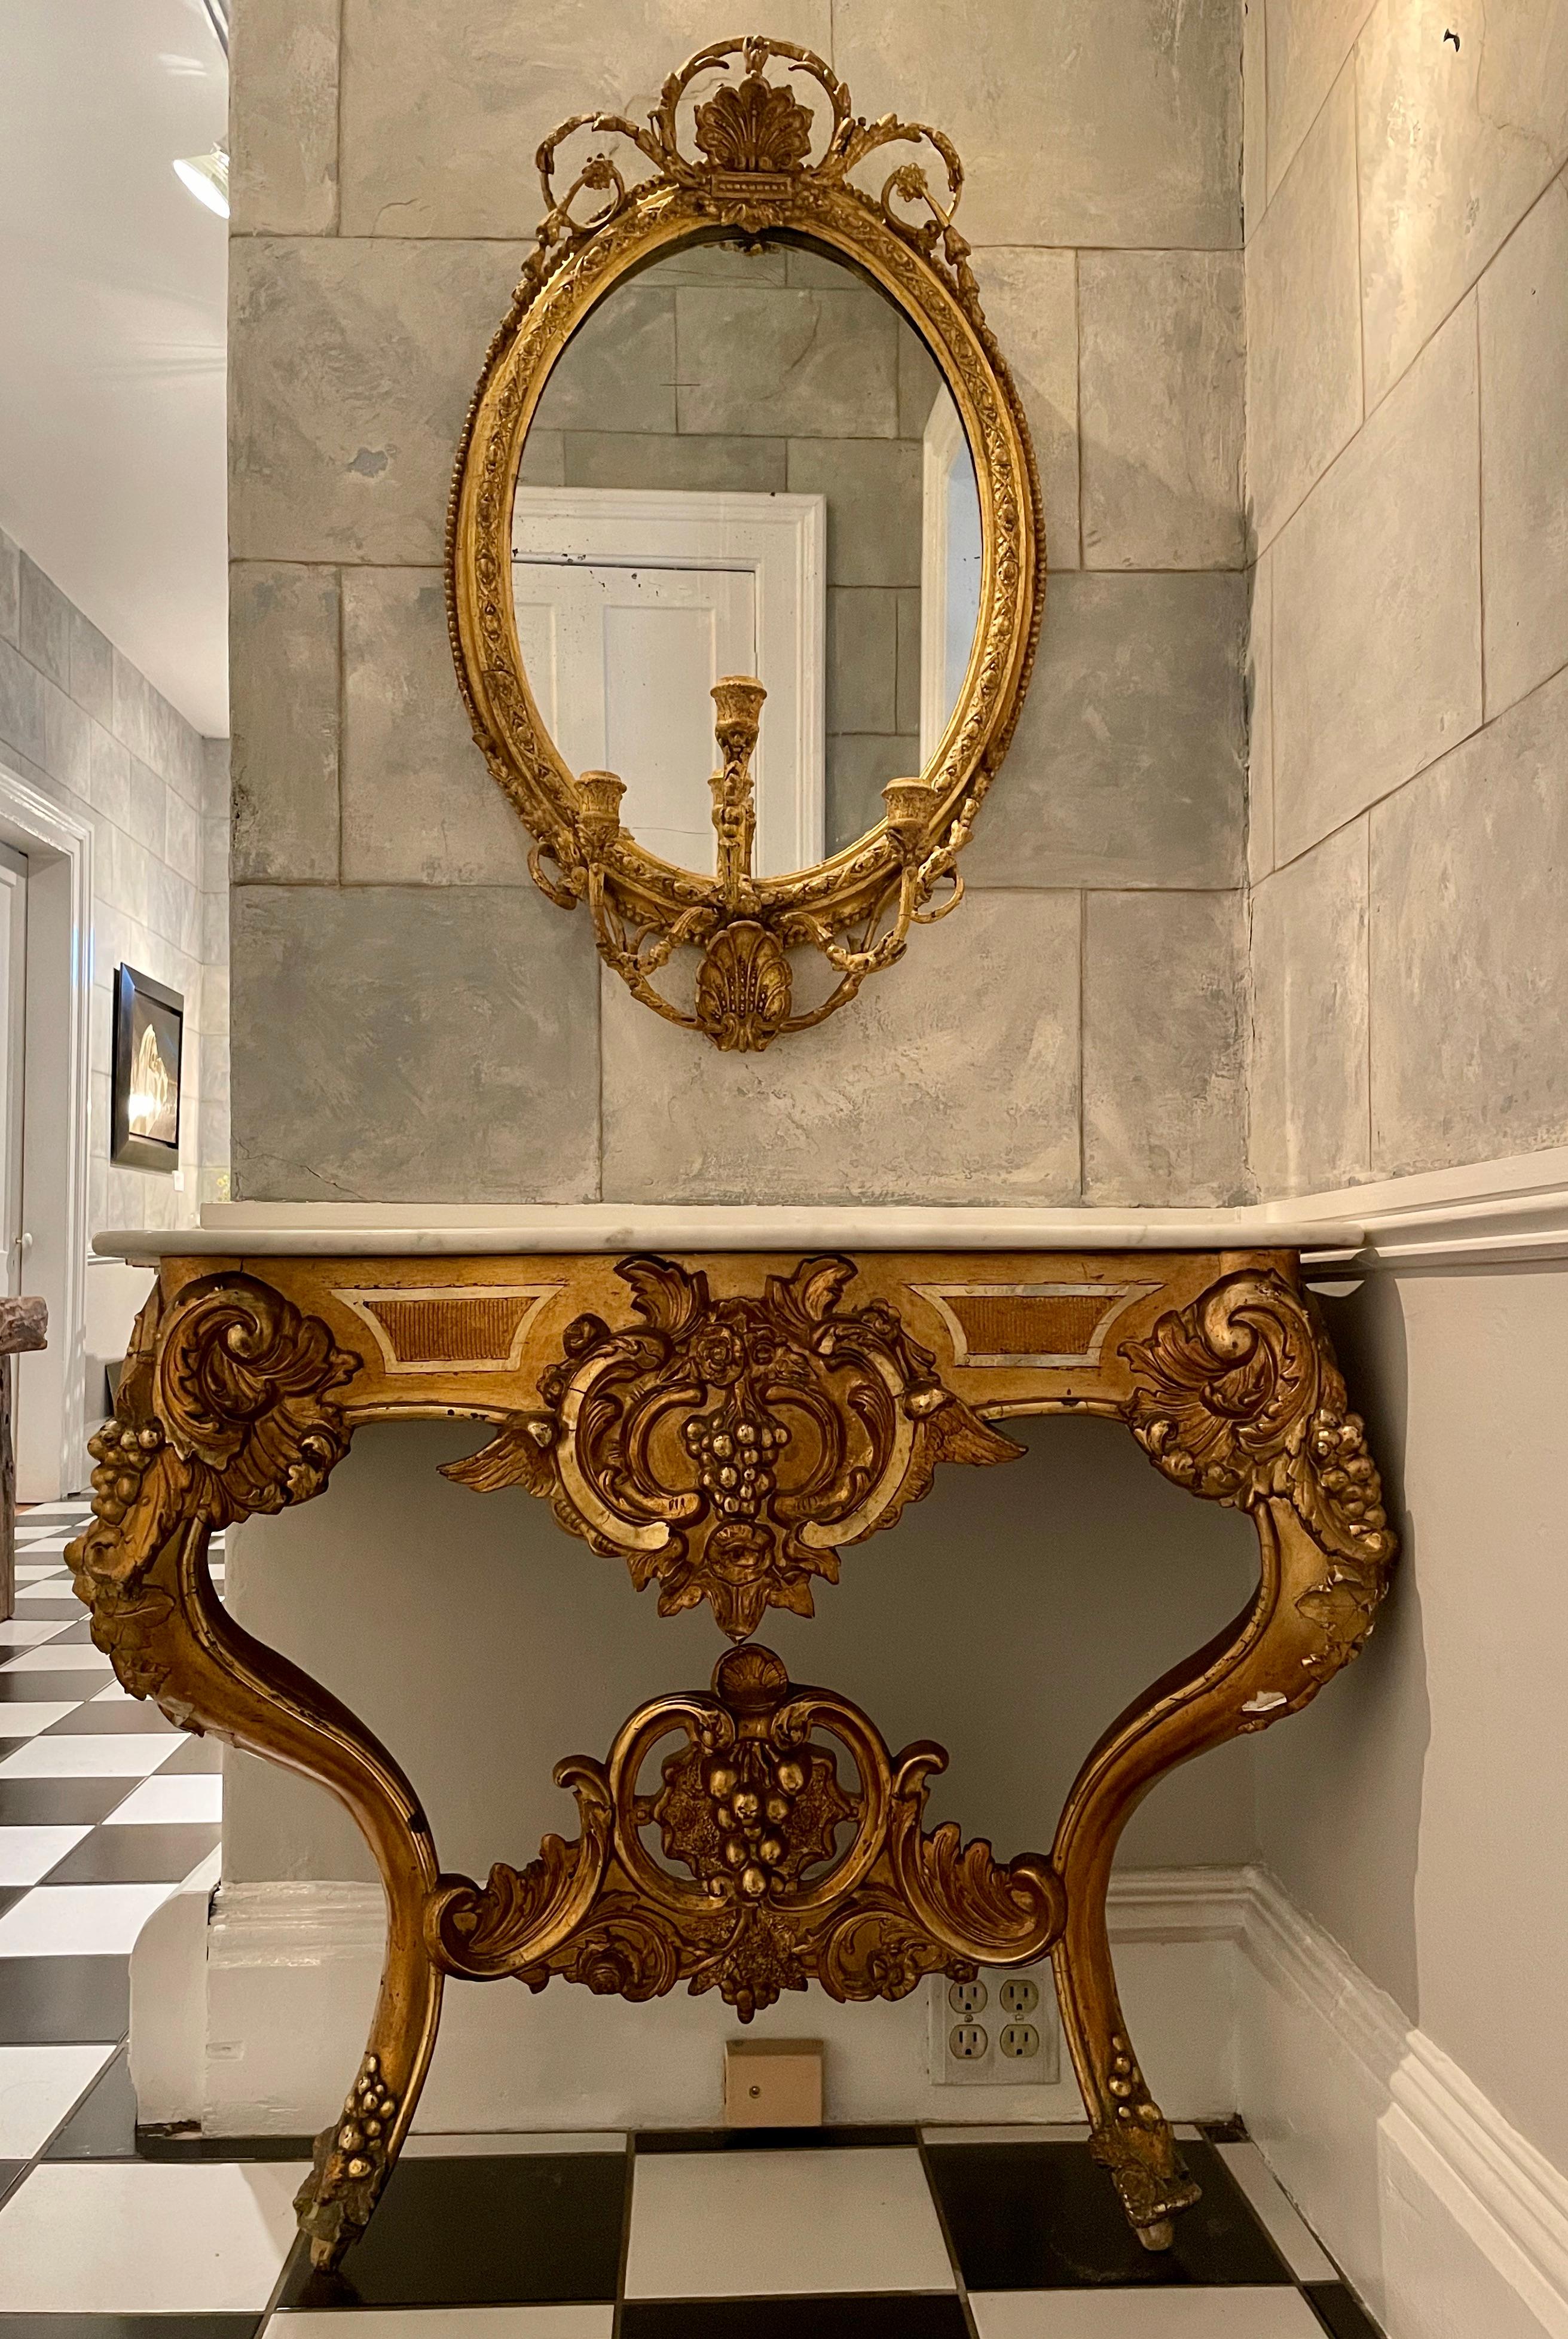 This stunning Italian table has enough sparkle to lift an entire room! The wooden base is beautifully carved and water-gilded with three different shades of gilding--a rich golden yellow, a mellow golden-pink, and a lighter matte gold, so it is not